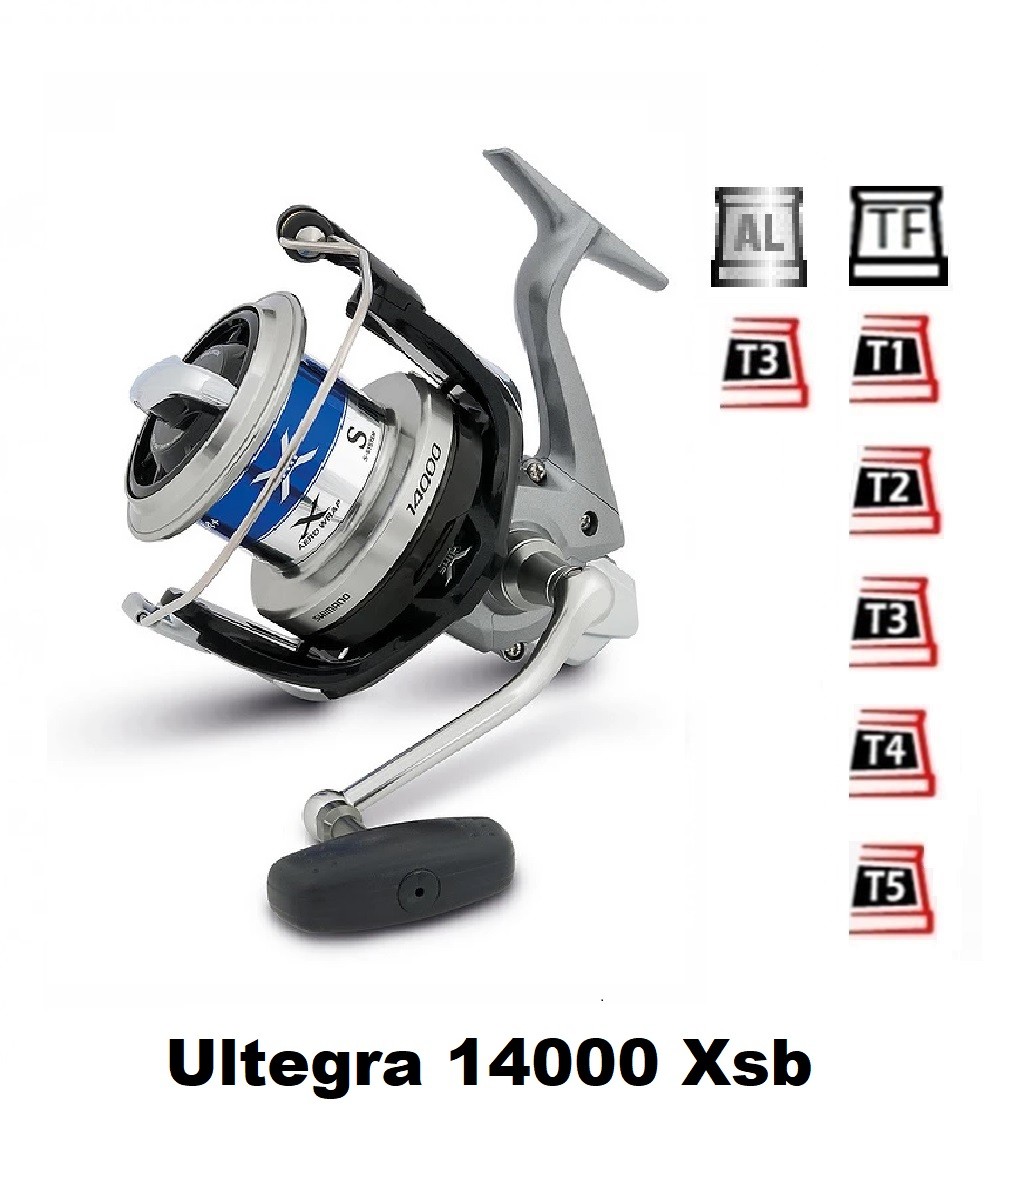 https://www.mvspools.com/6171/spare-spools-and-accessories-compatible-with-fishing-reel-shimano-ultegra-14000-xsb.jpg